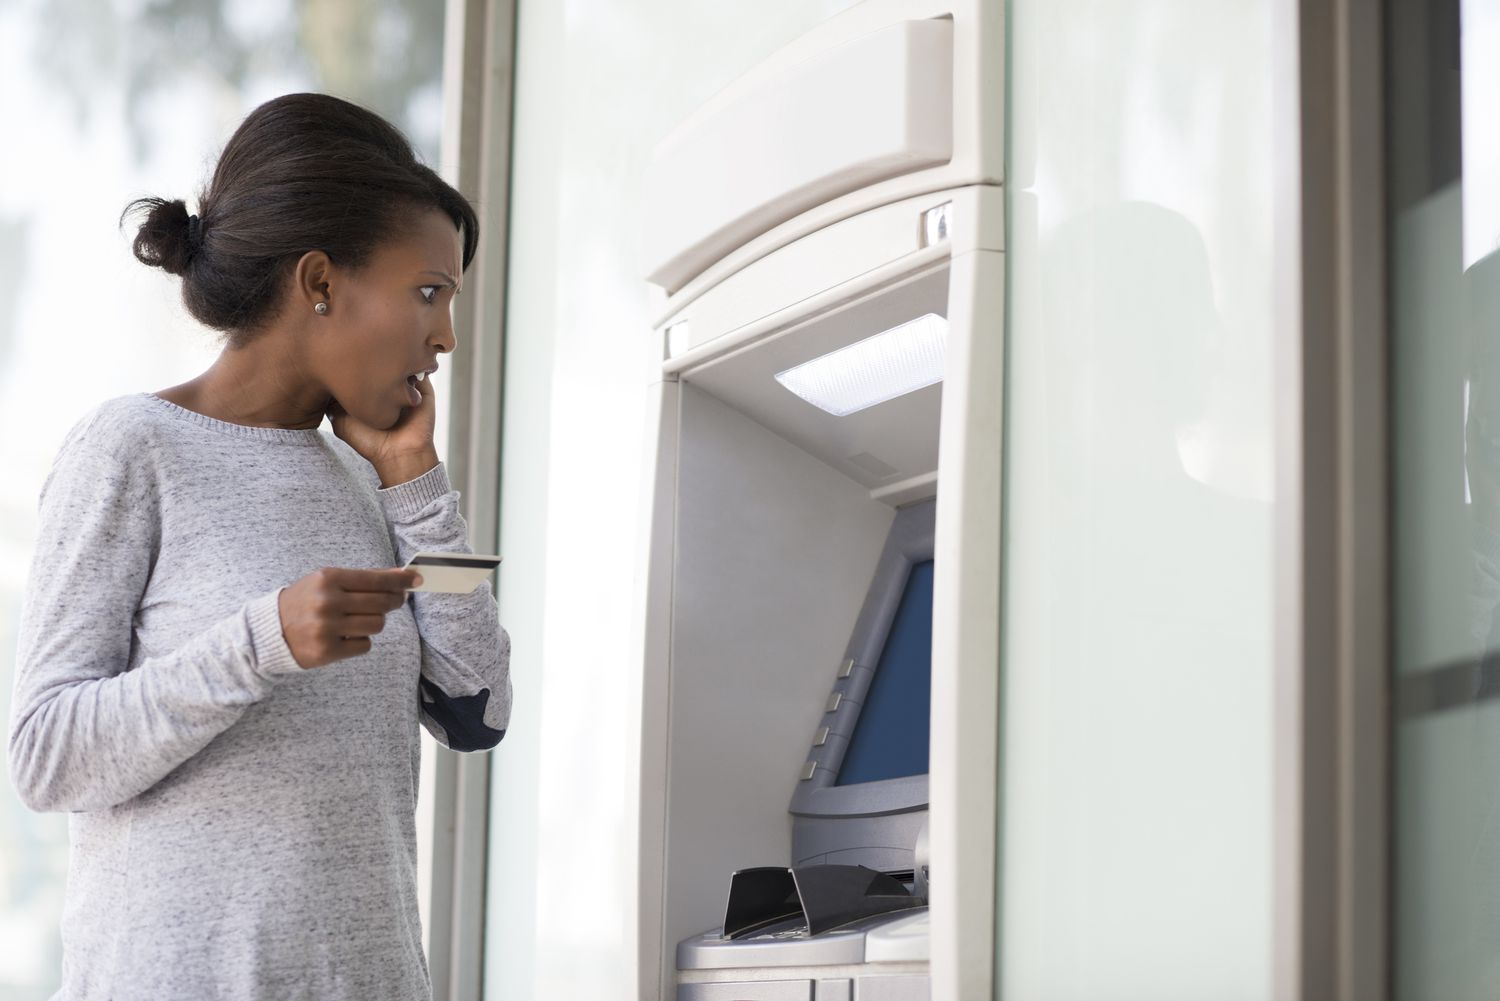 A young woman with a shocked facial expression looking at the ATM